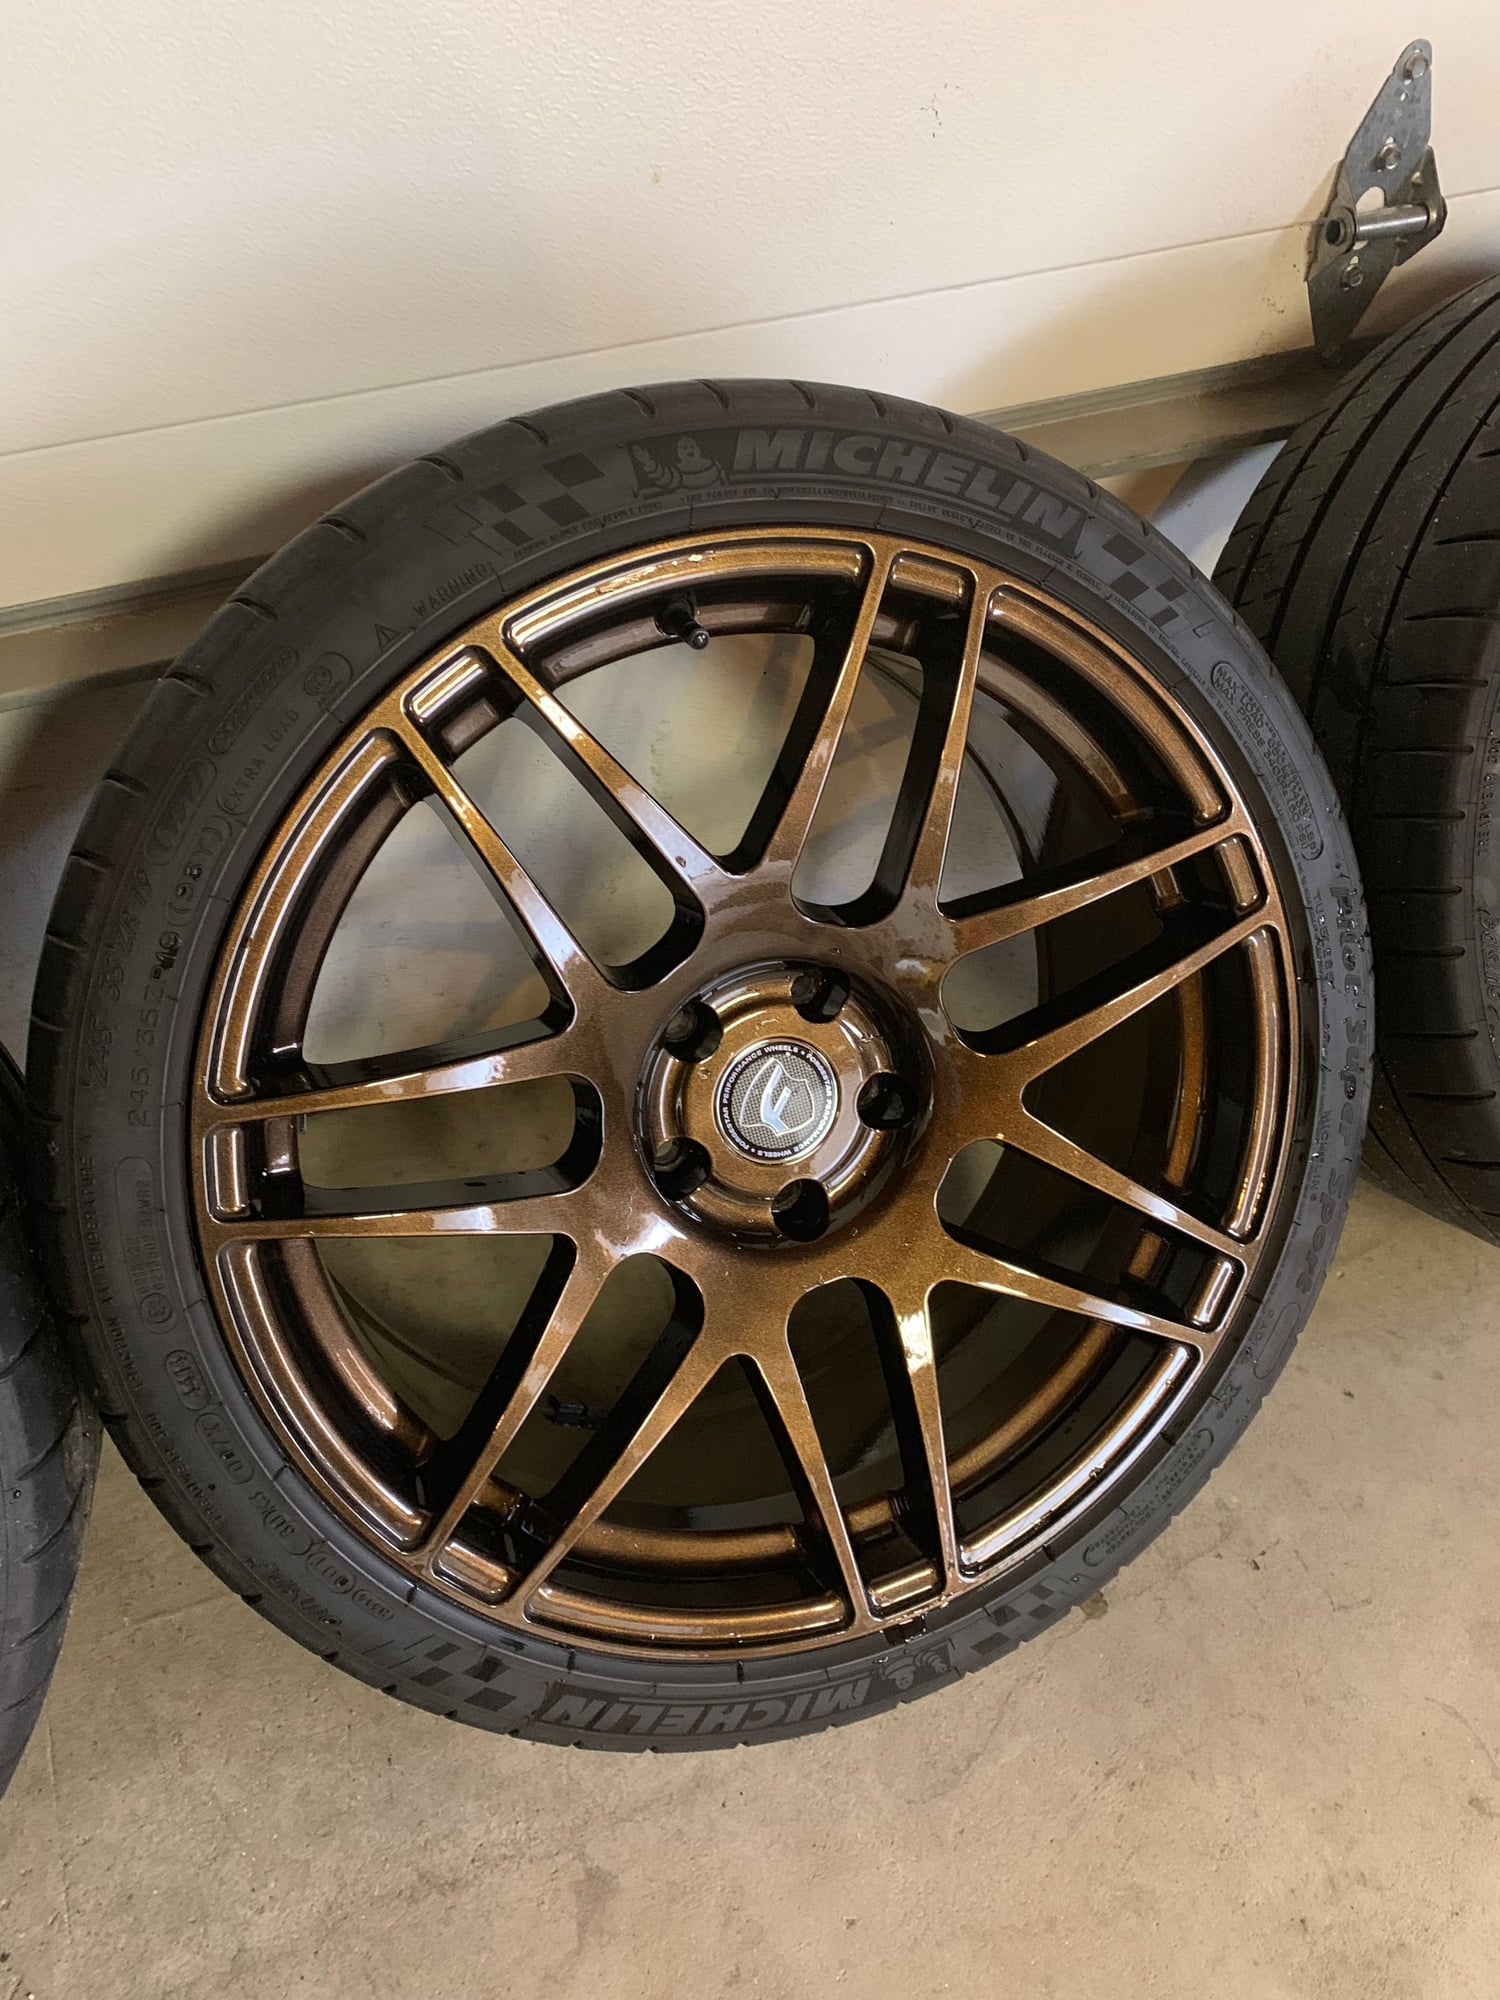 Wheels and Tires/Axles - 19" Forgestar F14 *Bronze Burst* Michelin Pilot Super Sport - Used - Harwood Heights, IL 60706, United States